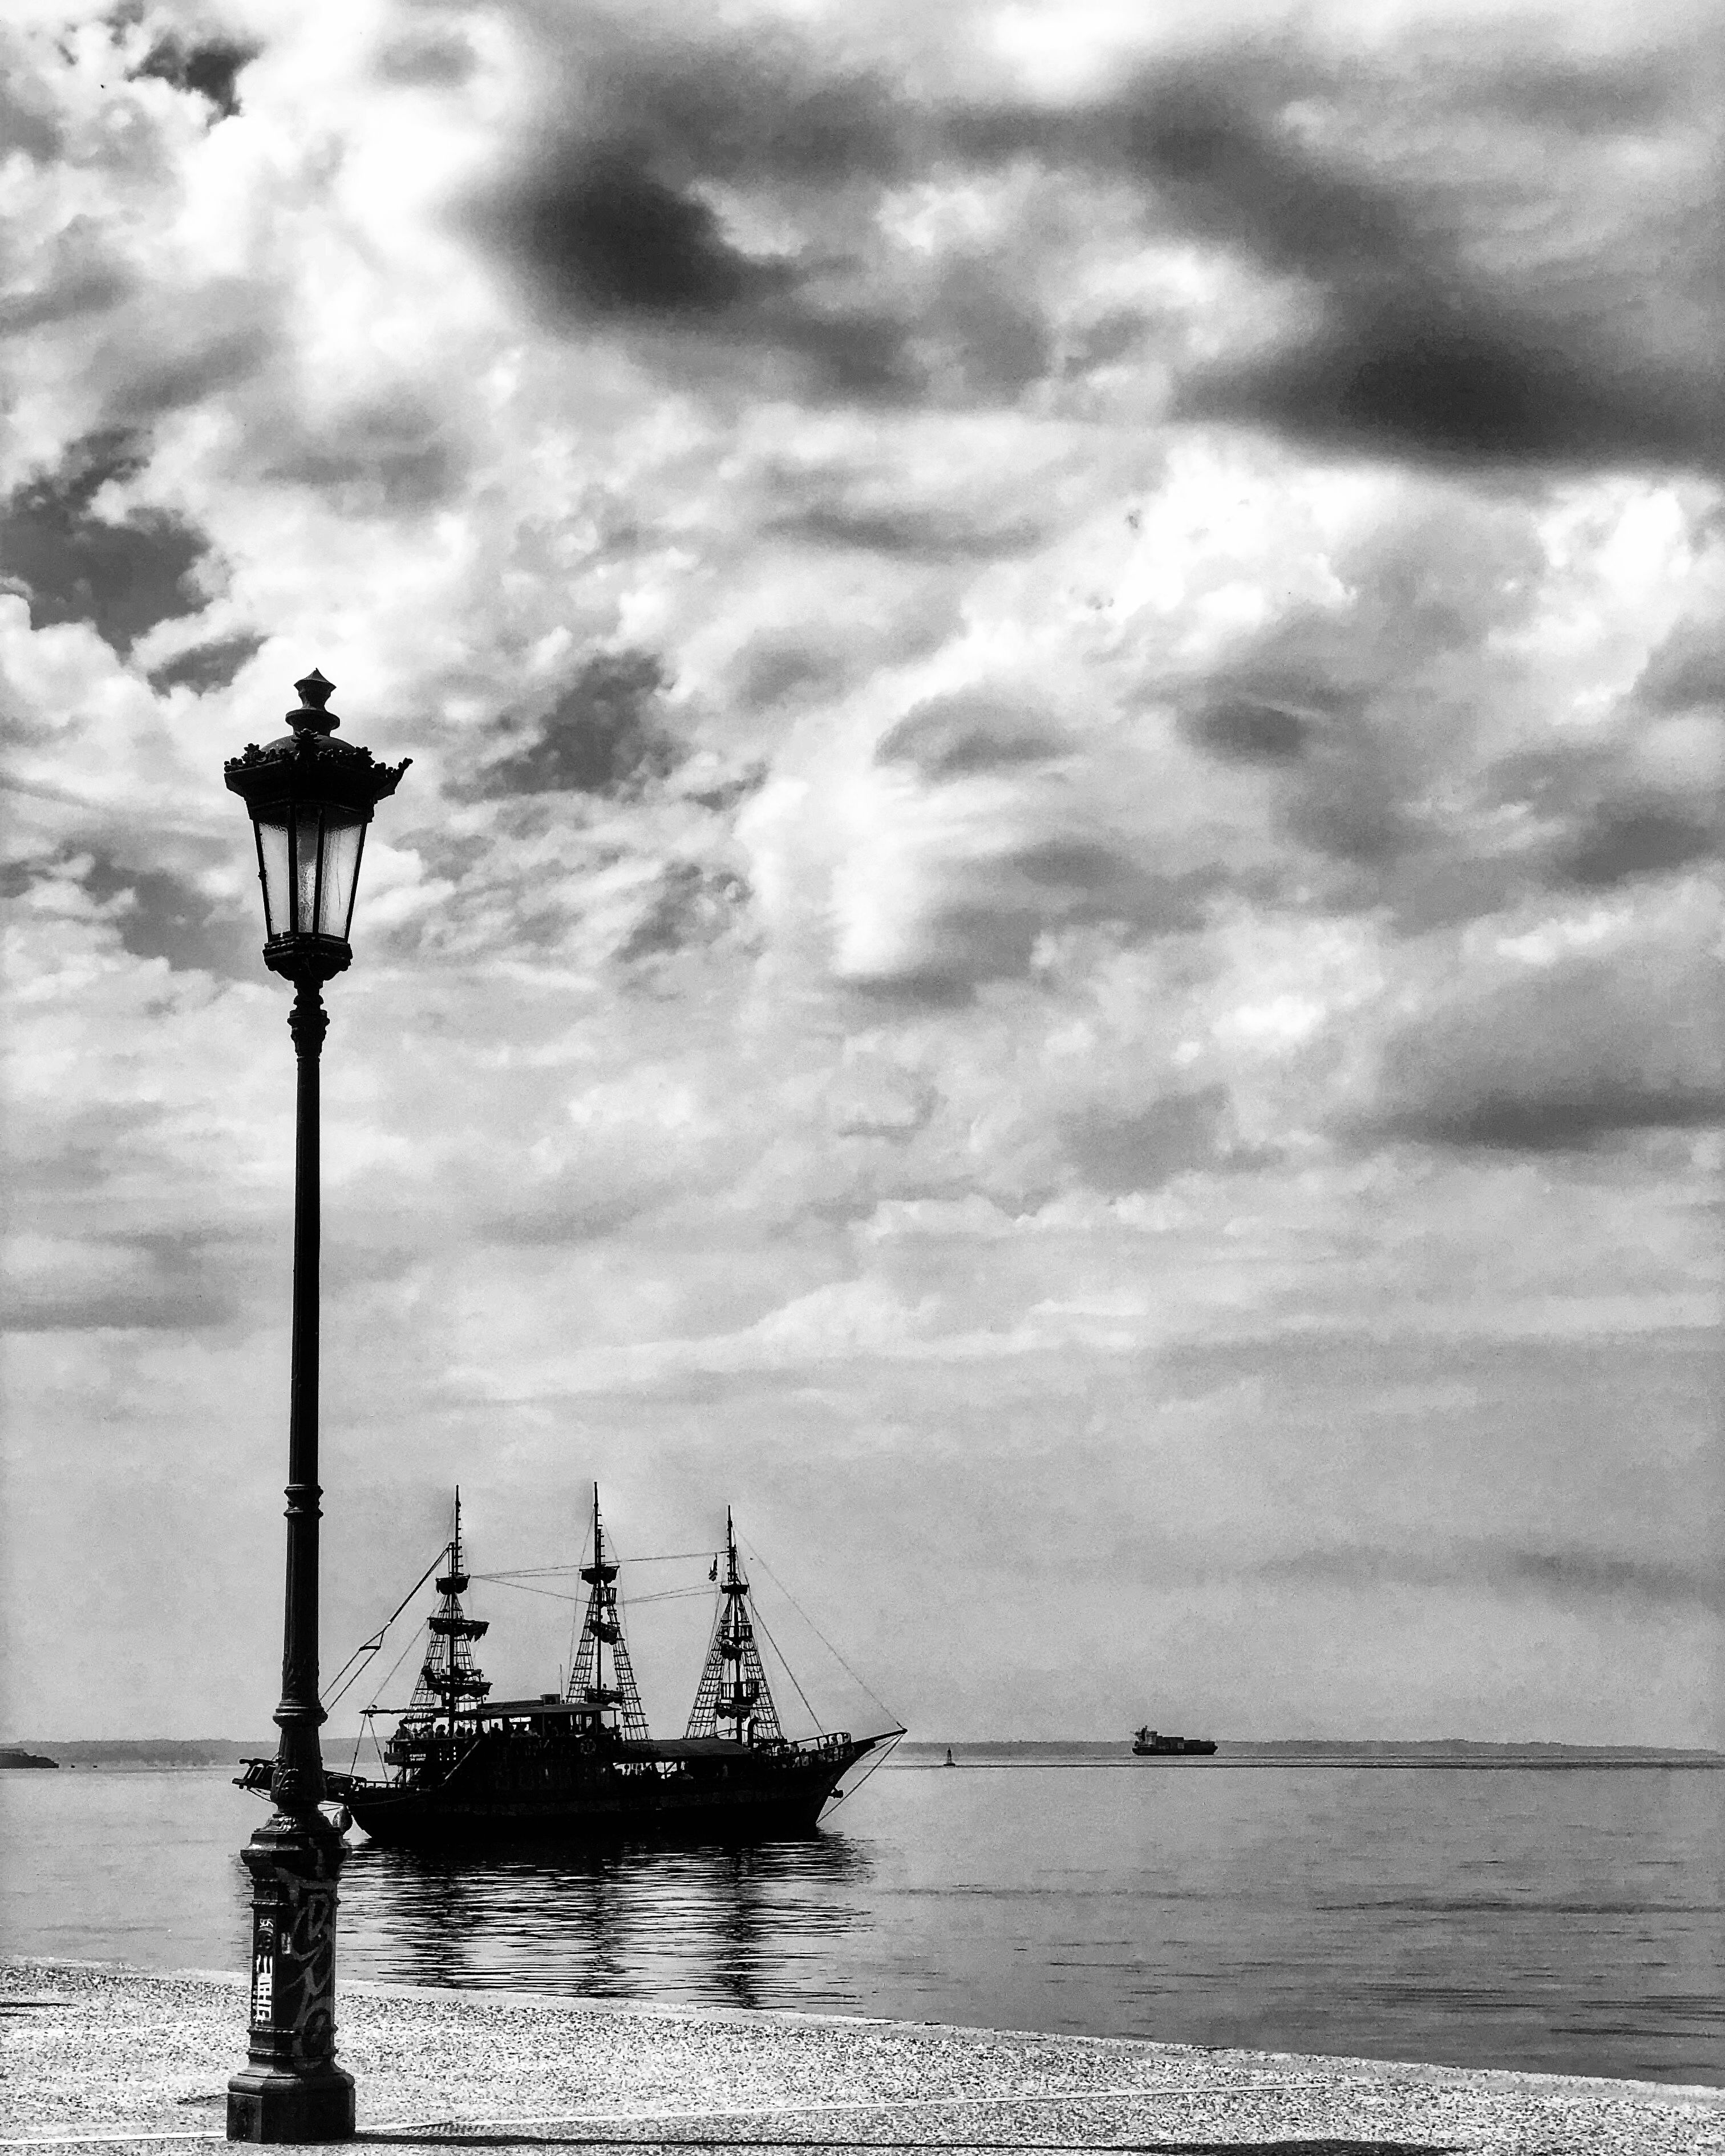 Caption: A black and white photo of an old ship leaving the docks and a lamp in front of it. (Local Guide DanniS)